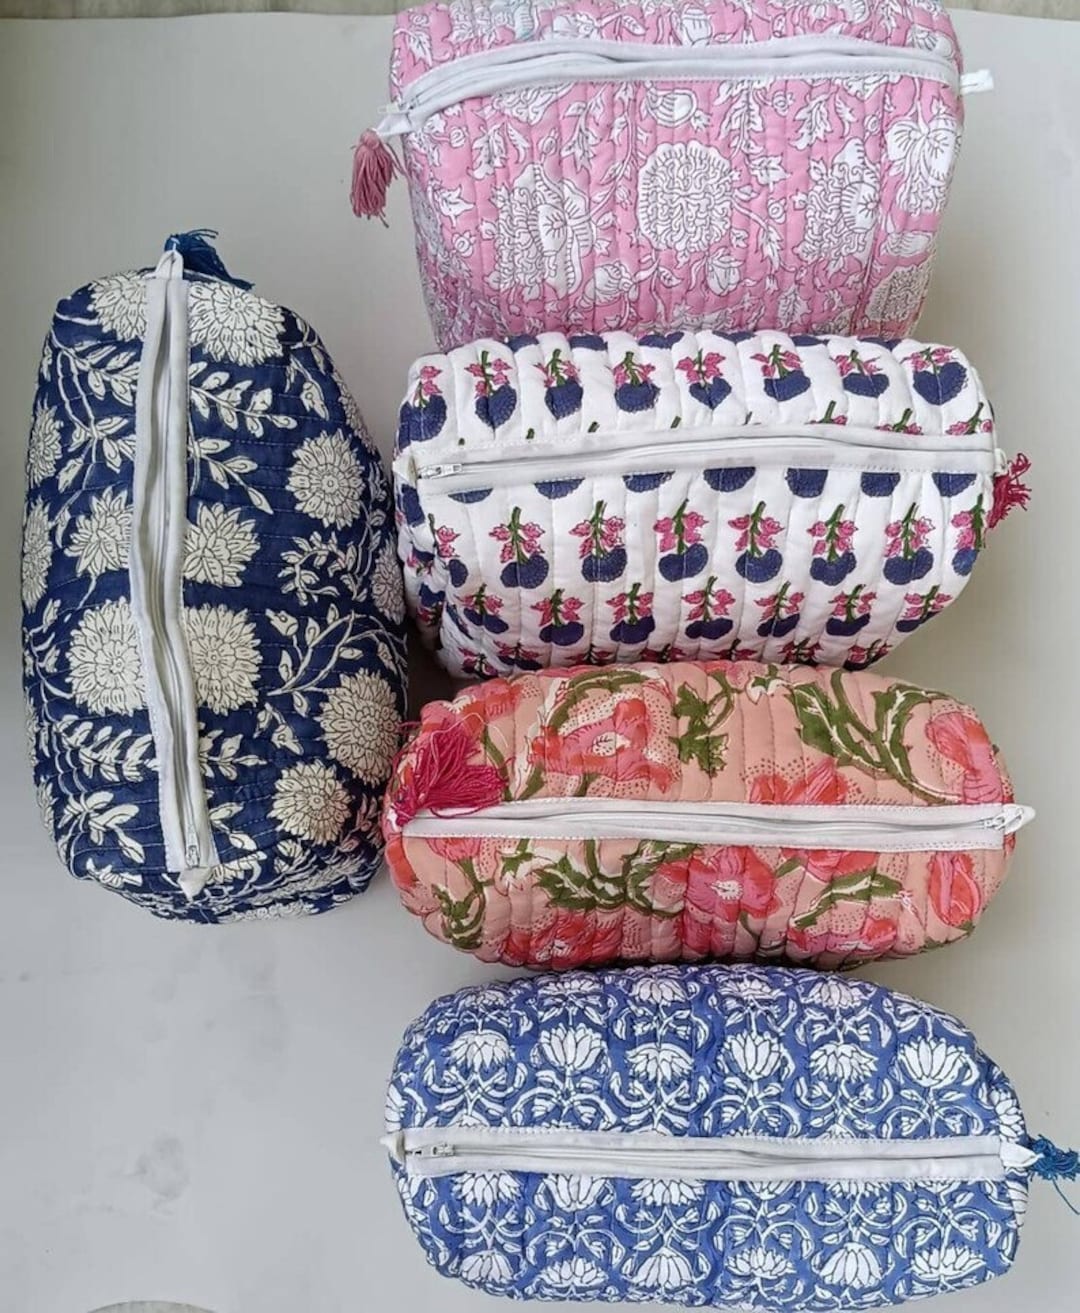 Set of 3 Pieces Toiletry Bag, Cotton Quilted Wash Bags, Toiletry